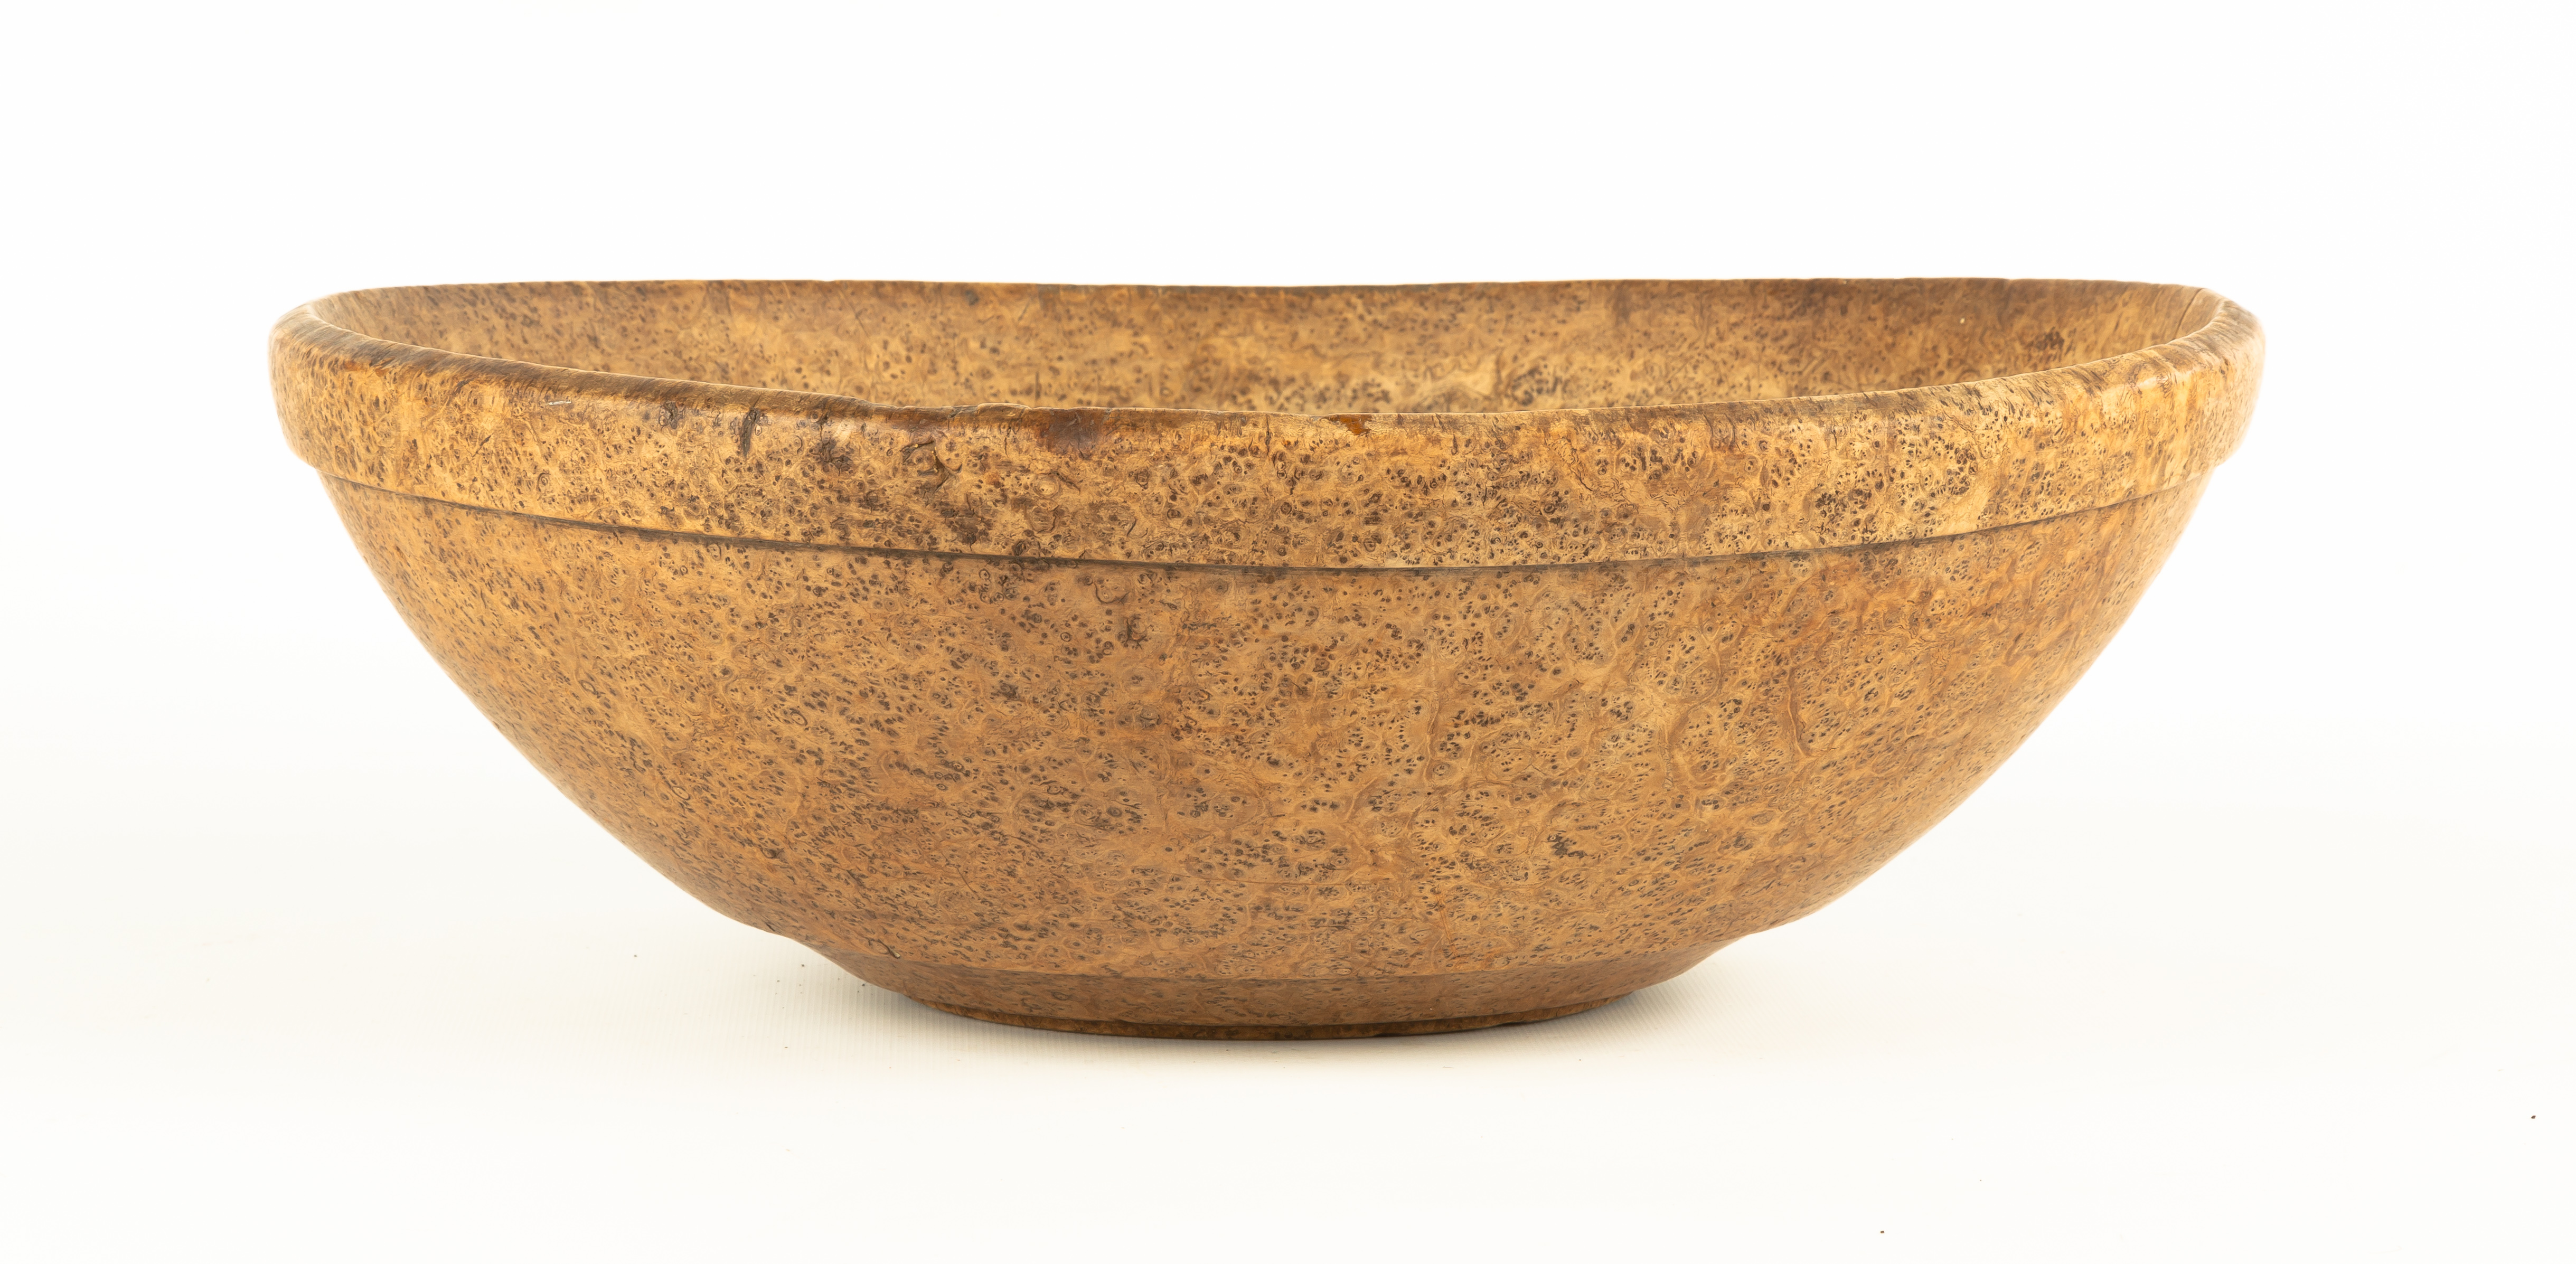 EARLY AMERICAN TURNED BURL BOWL 35315a